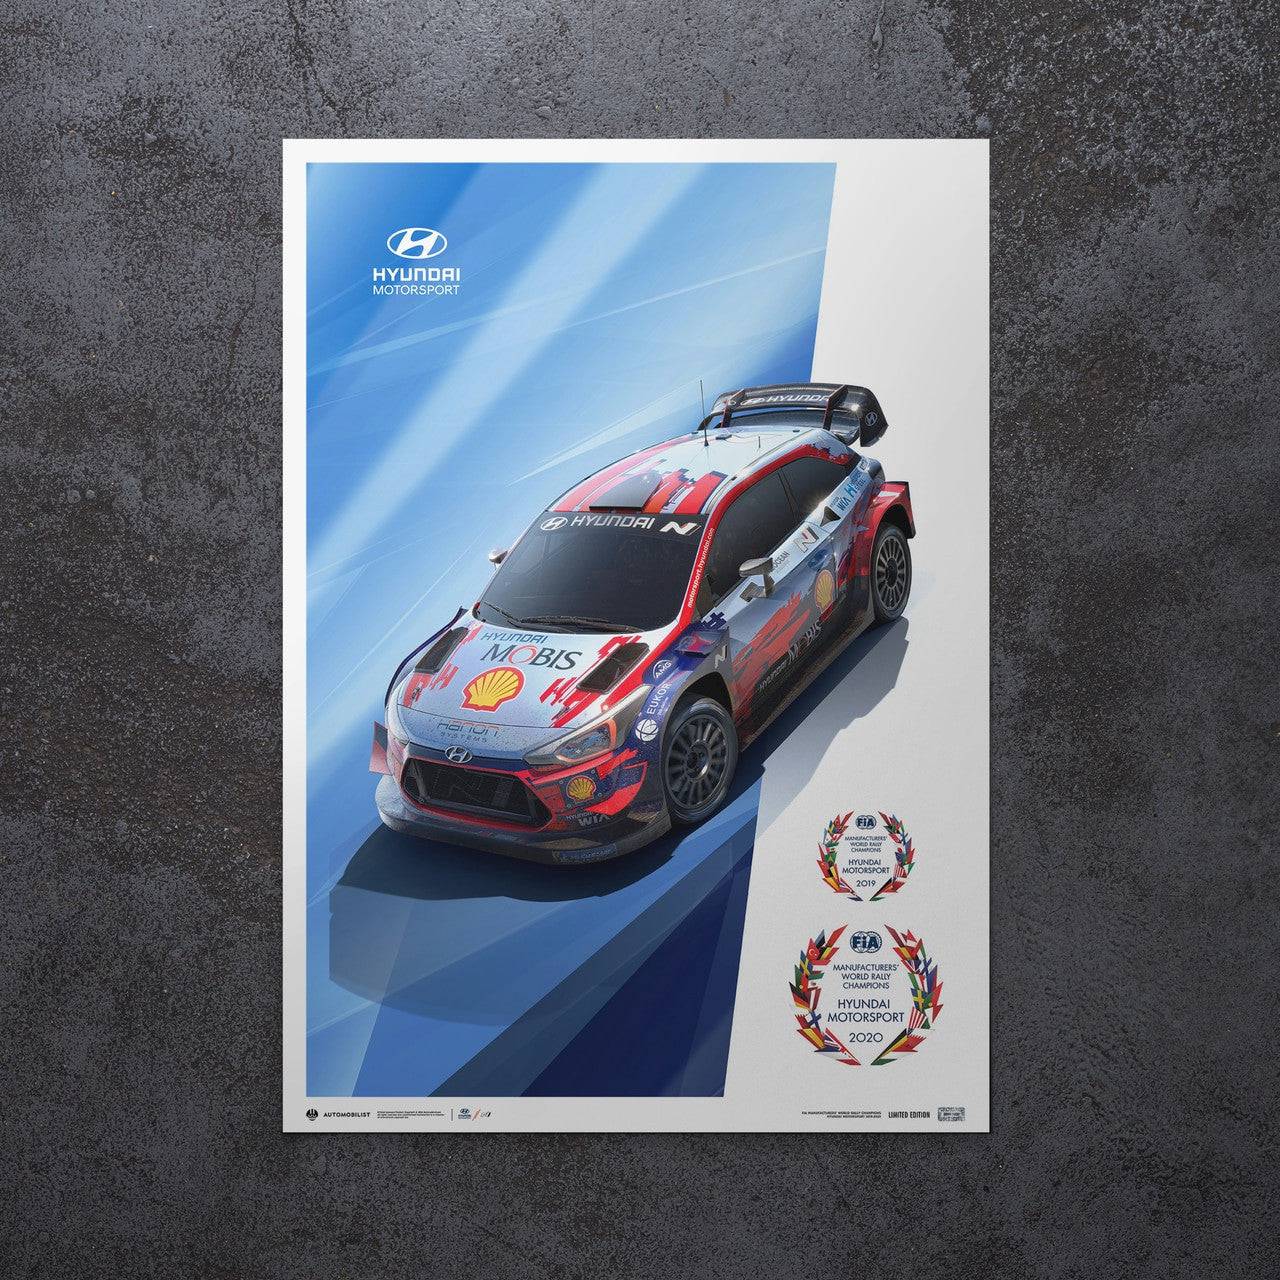 Hyundai Motorsport - WRC Manufacturers’ Champions 2019 and 2020 | Limited Edition | Unique #s